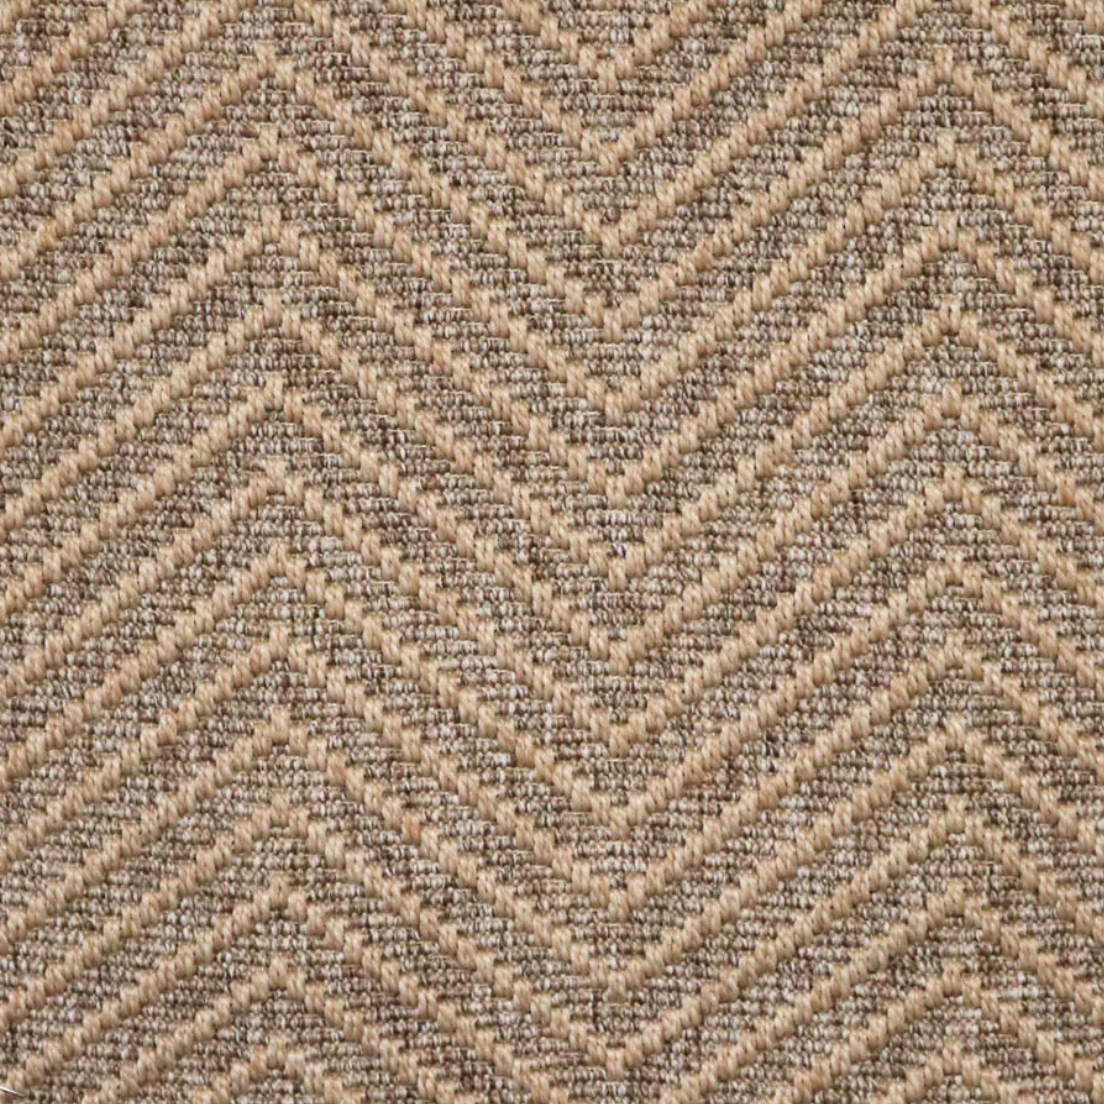 Spring Special Danielle Rollins Selected Chevron Rug